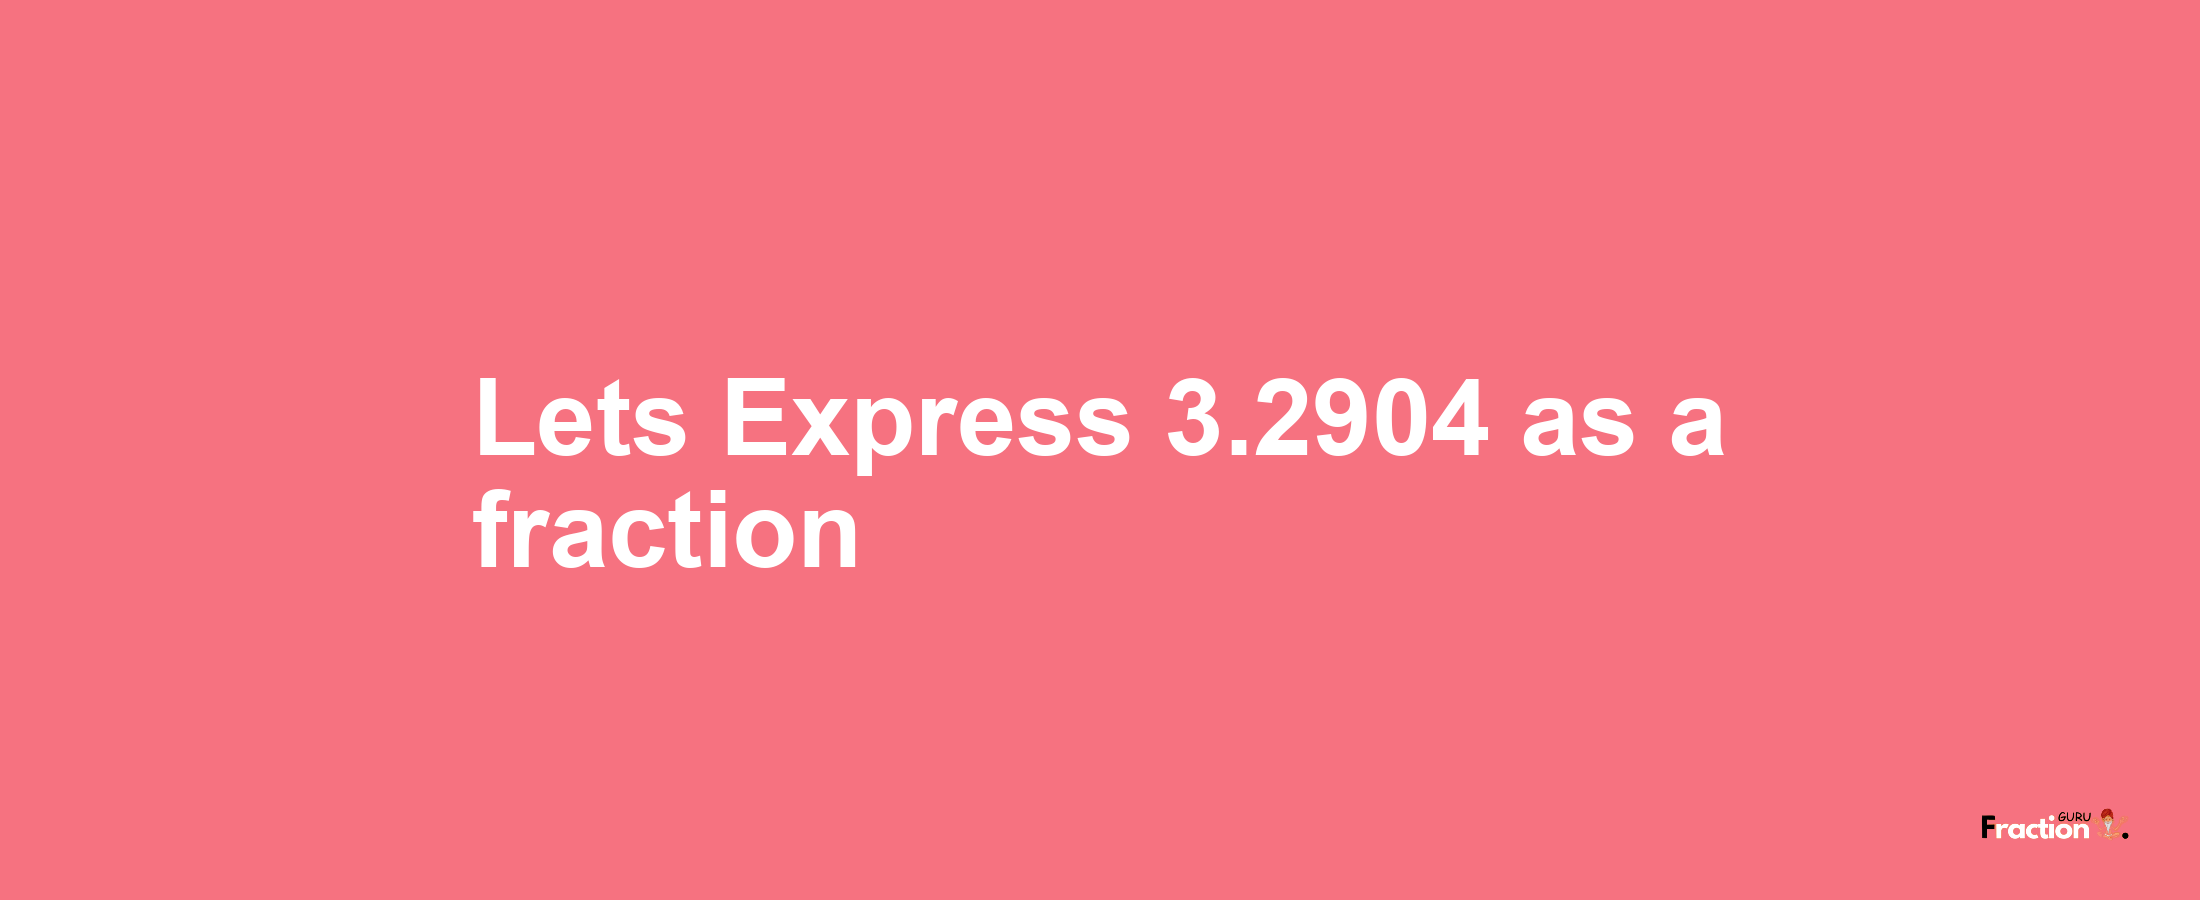 Lets Express 3.2904 as afraction